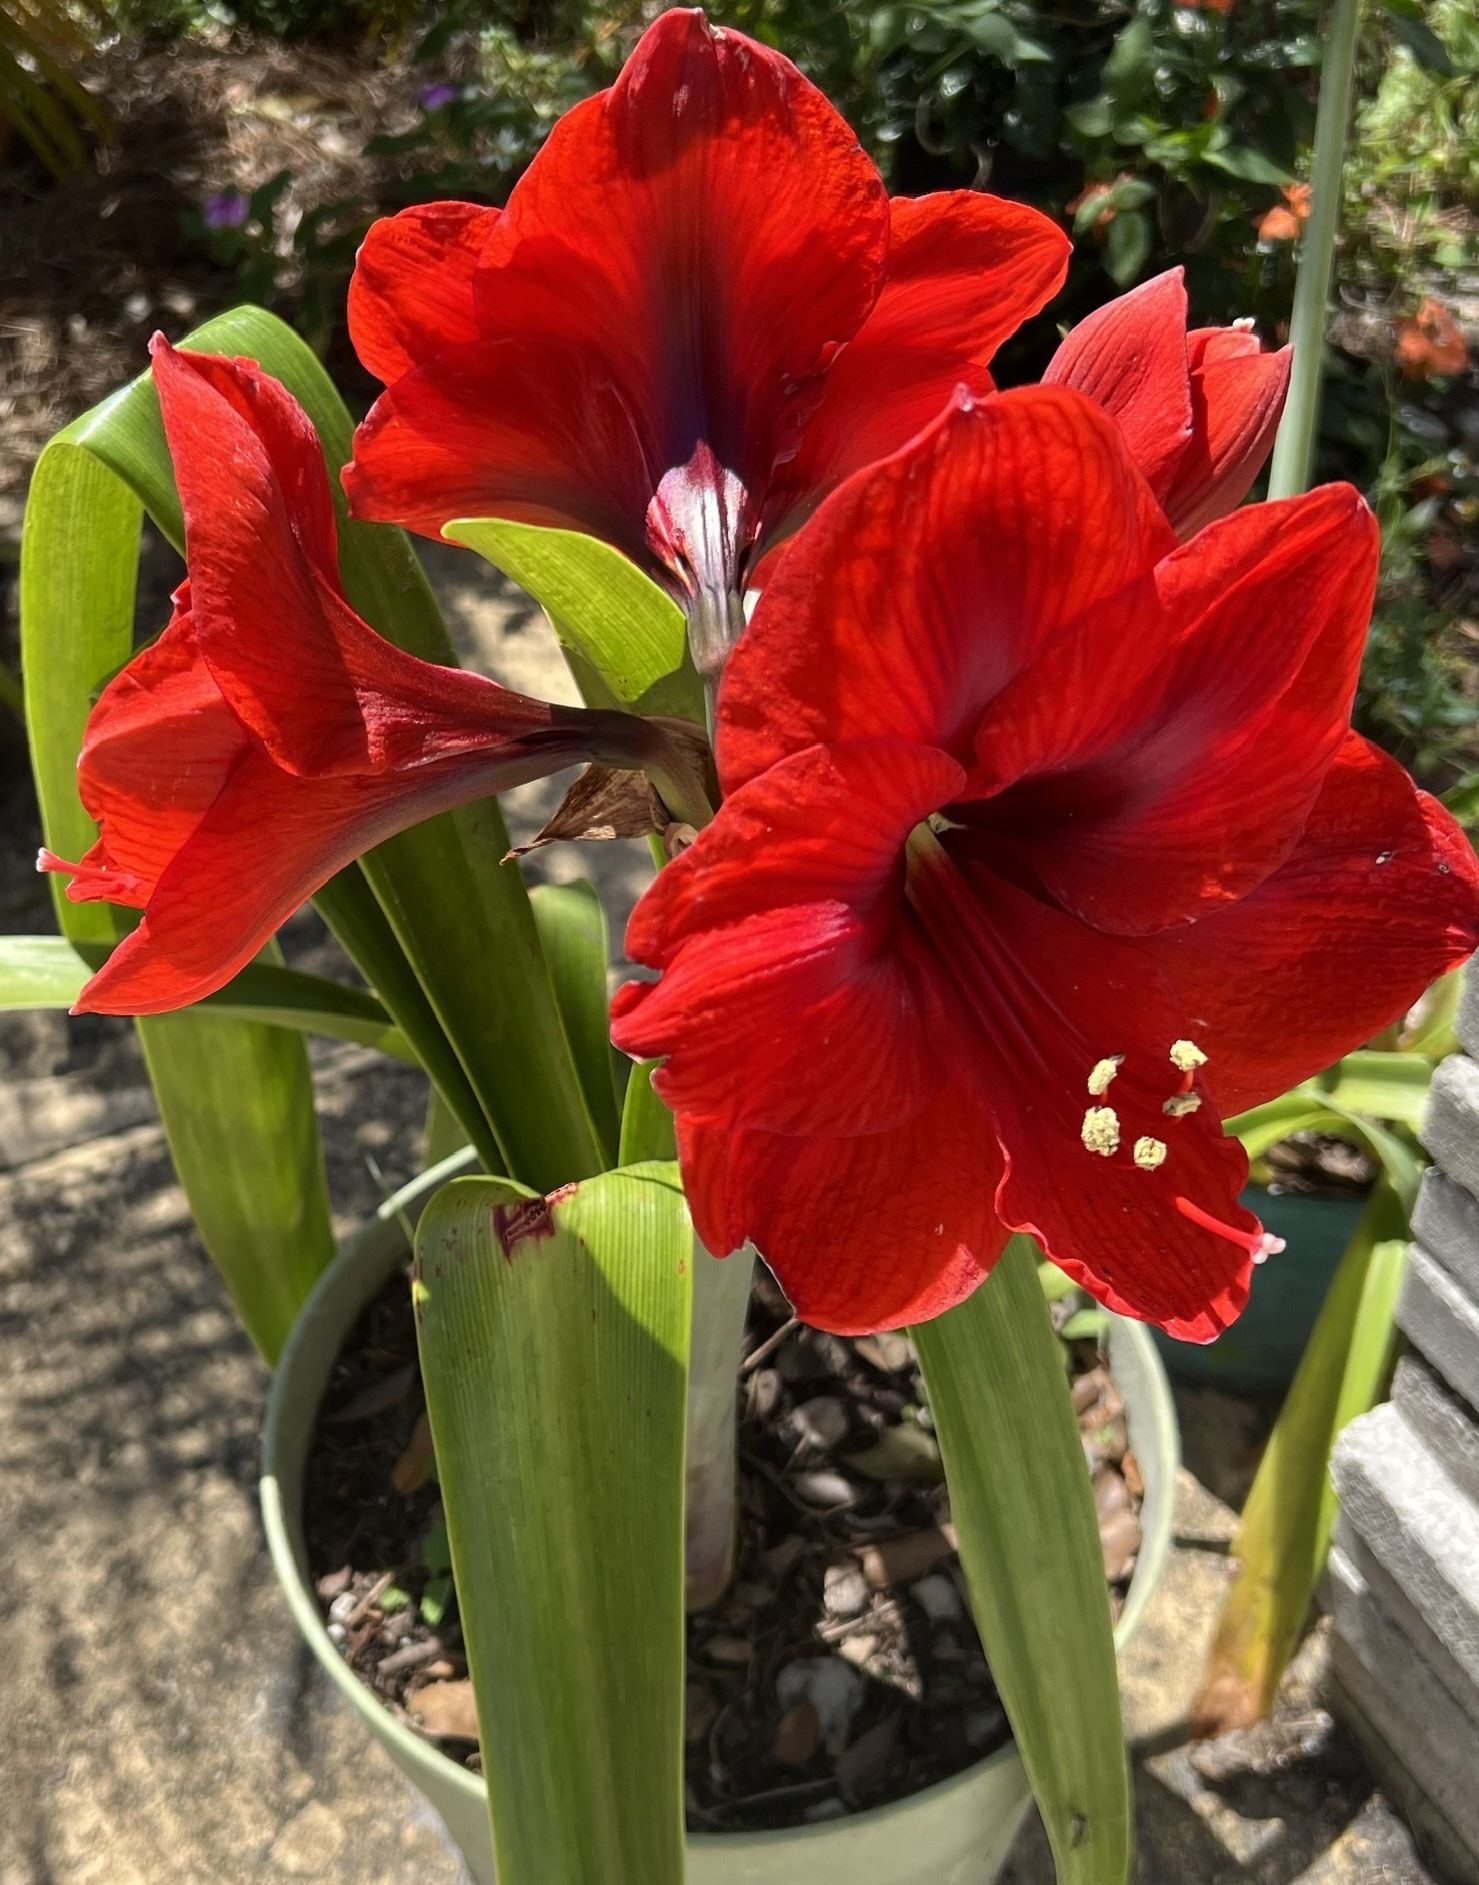 BLOOMING AMARYLLIS PLANTS IN PLASTIC POT FOR SALE